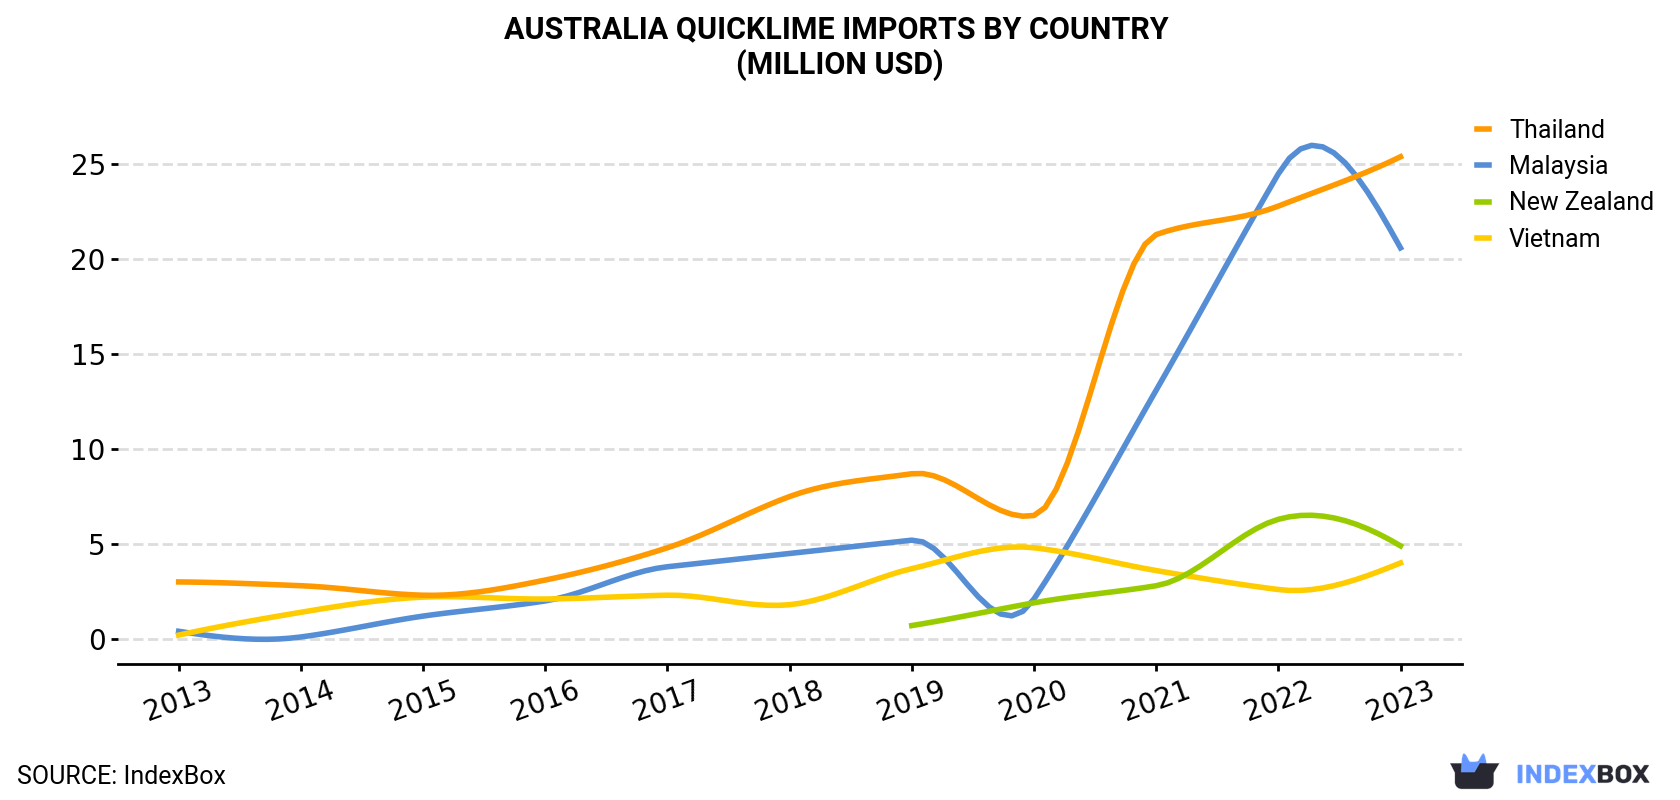 Australia Quicklime Imports By Country (Million USD)